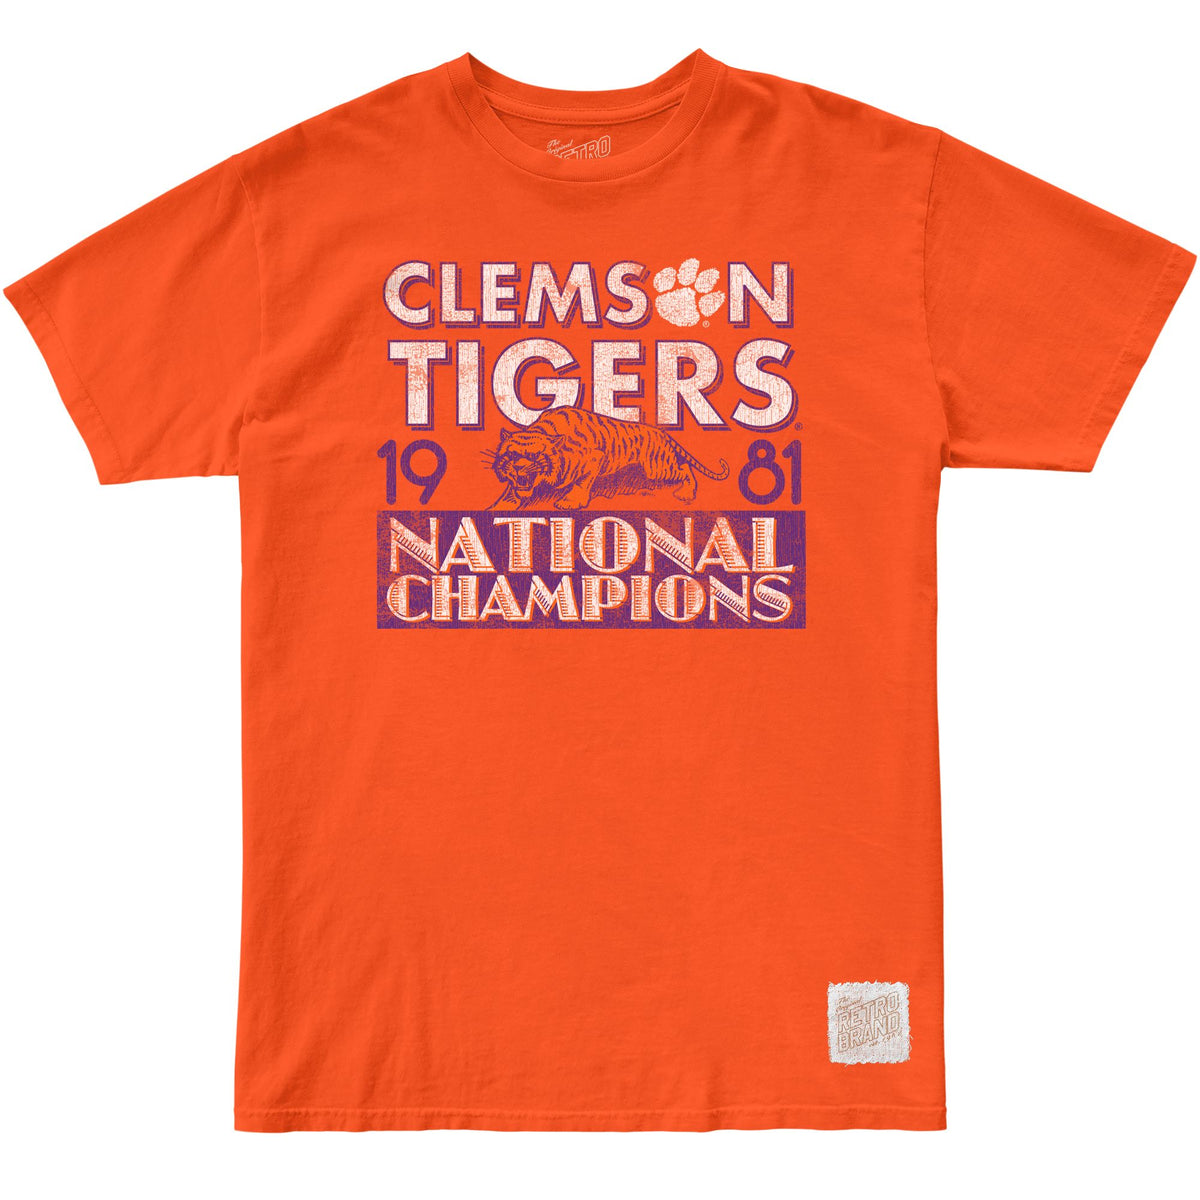 Clemson Tigers '81 National Champions 100% Cotton Tee